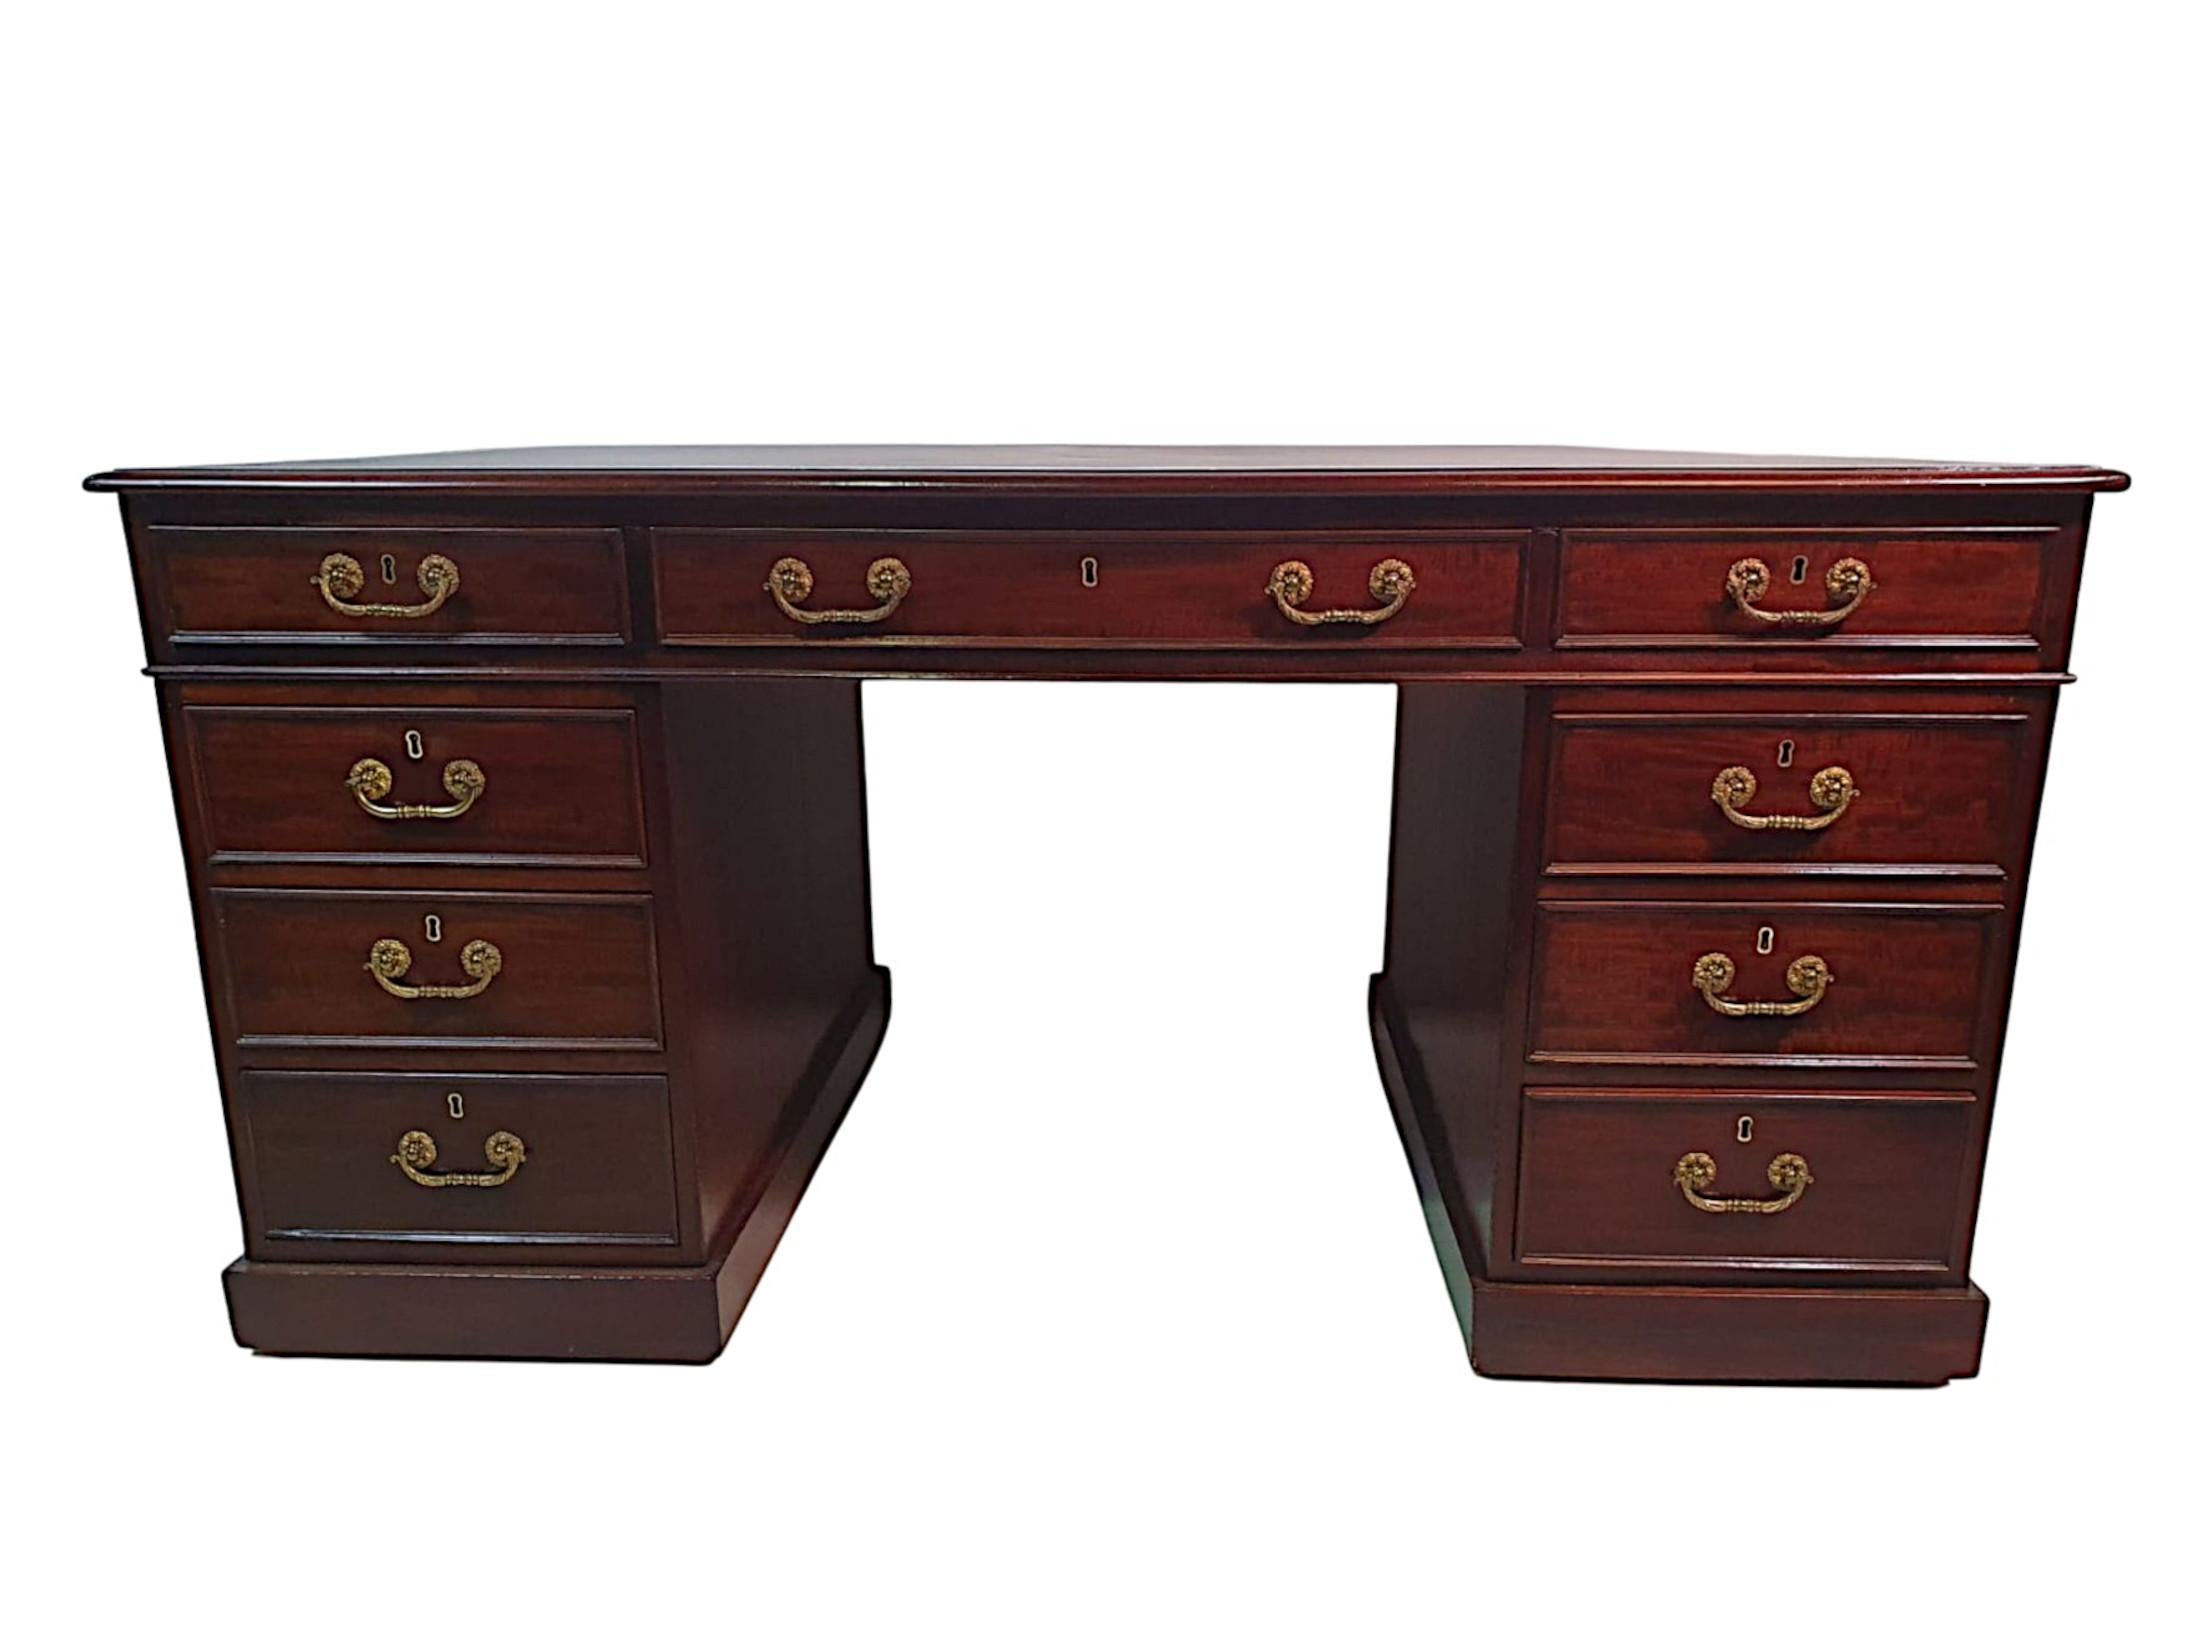 A very fine early 19th Century Regency mahogany partners desk. The moulded top fitted with wine gilt embossed tooled leather writing skiver surface raised over frieze with one long and two short drawers supported on pedestals with three graduated